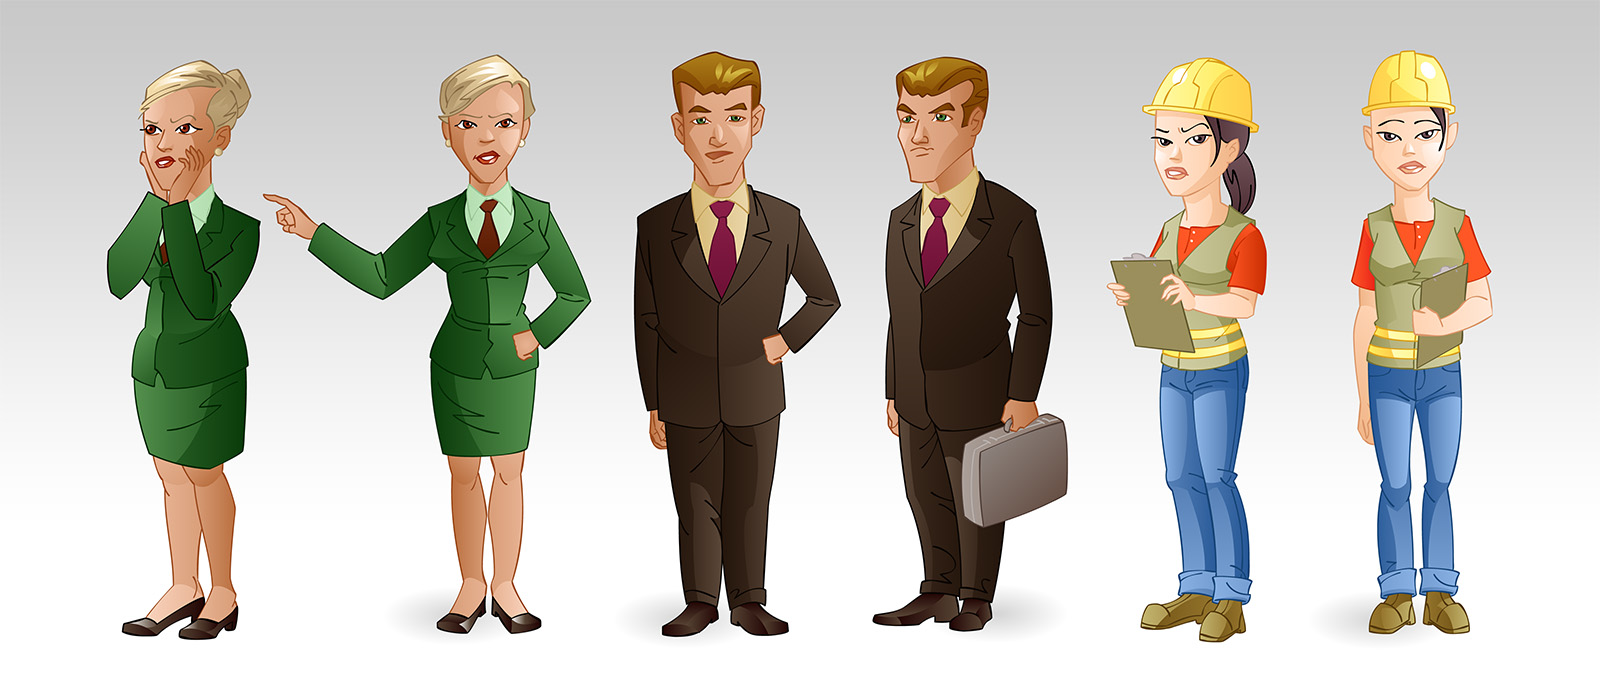 business professional e-learning vector character illustrations